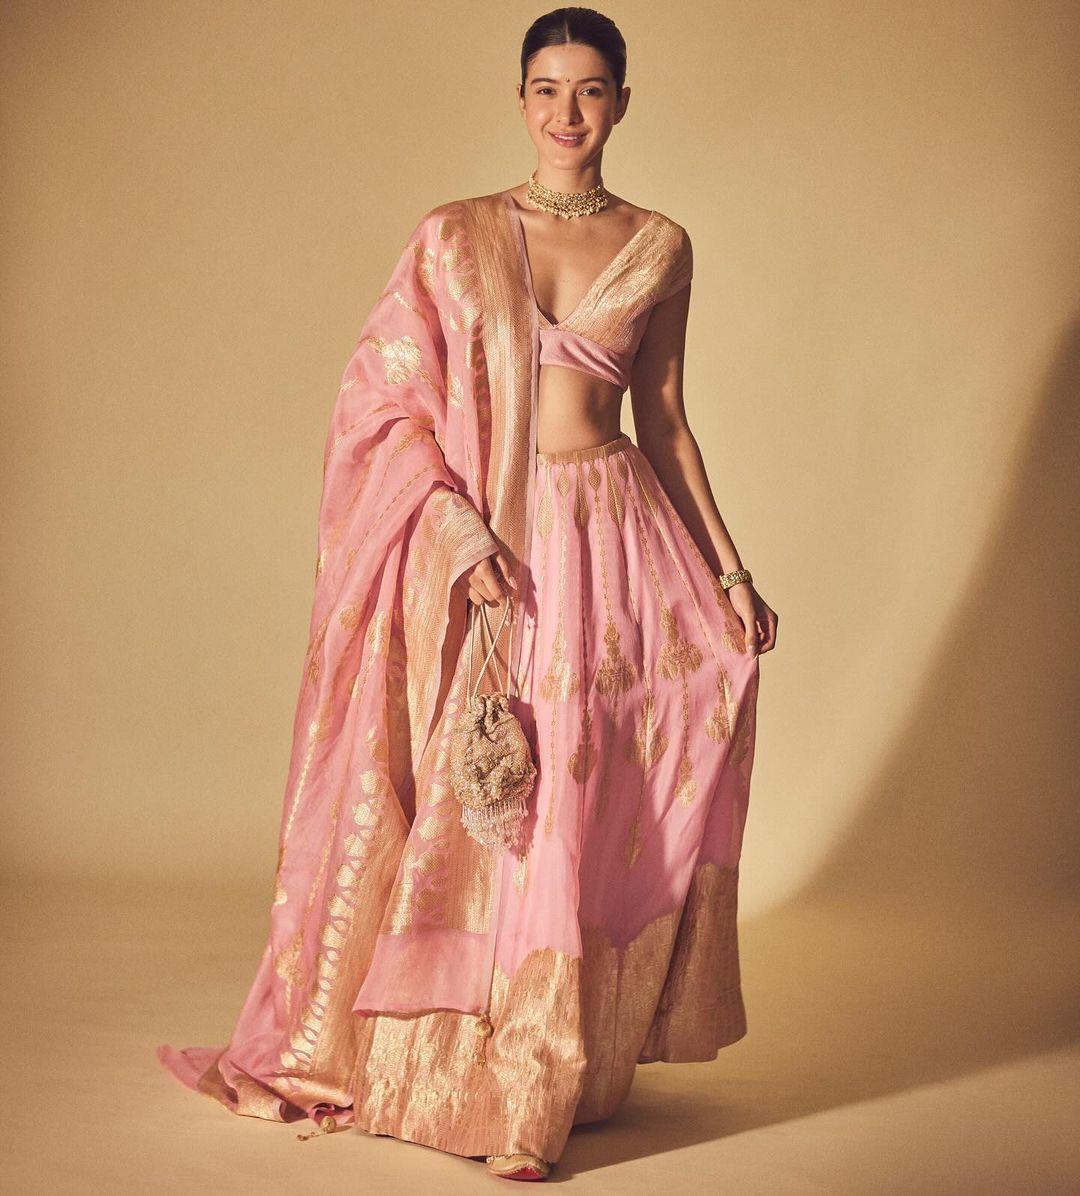 Shanaya Kapoor showcased the timeless elegance of a plain pink lehenga, proving its versatility as the perfect go-to for any occasion